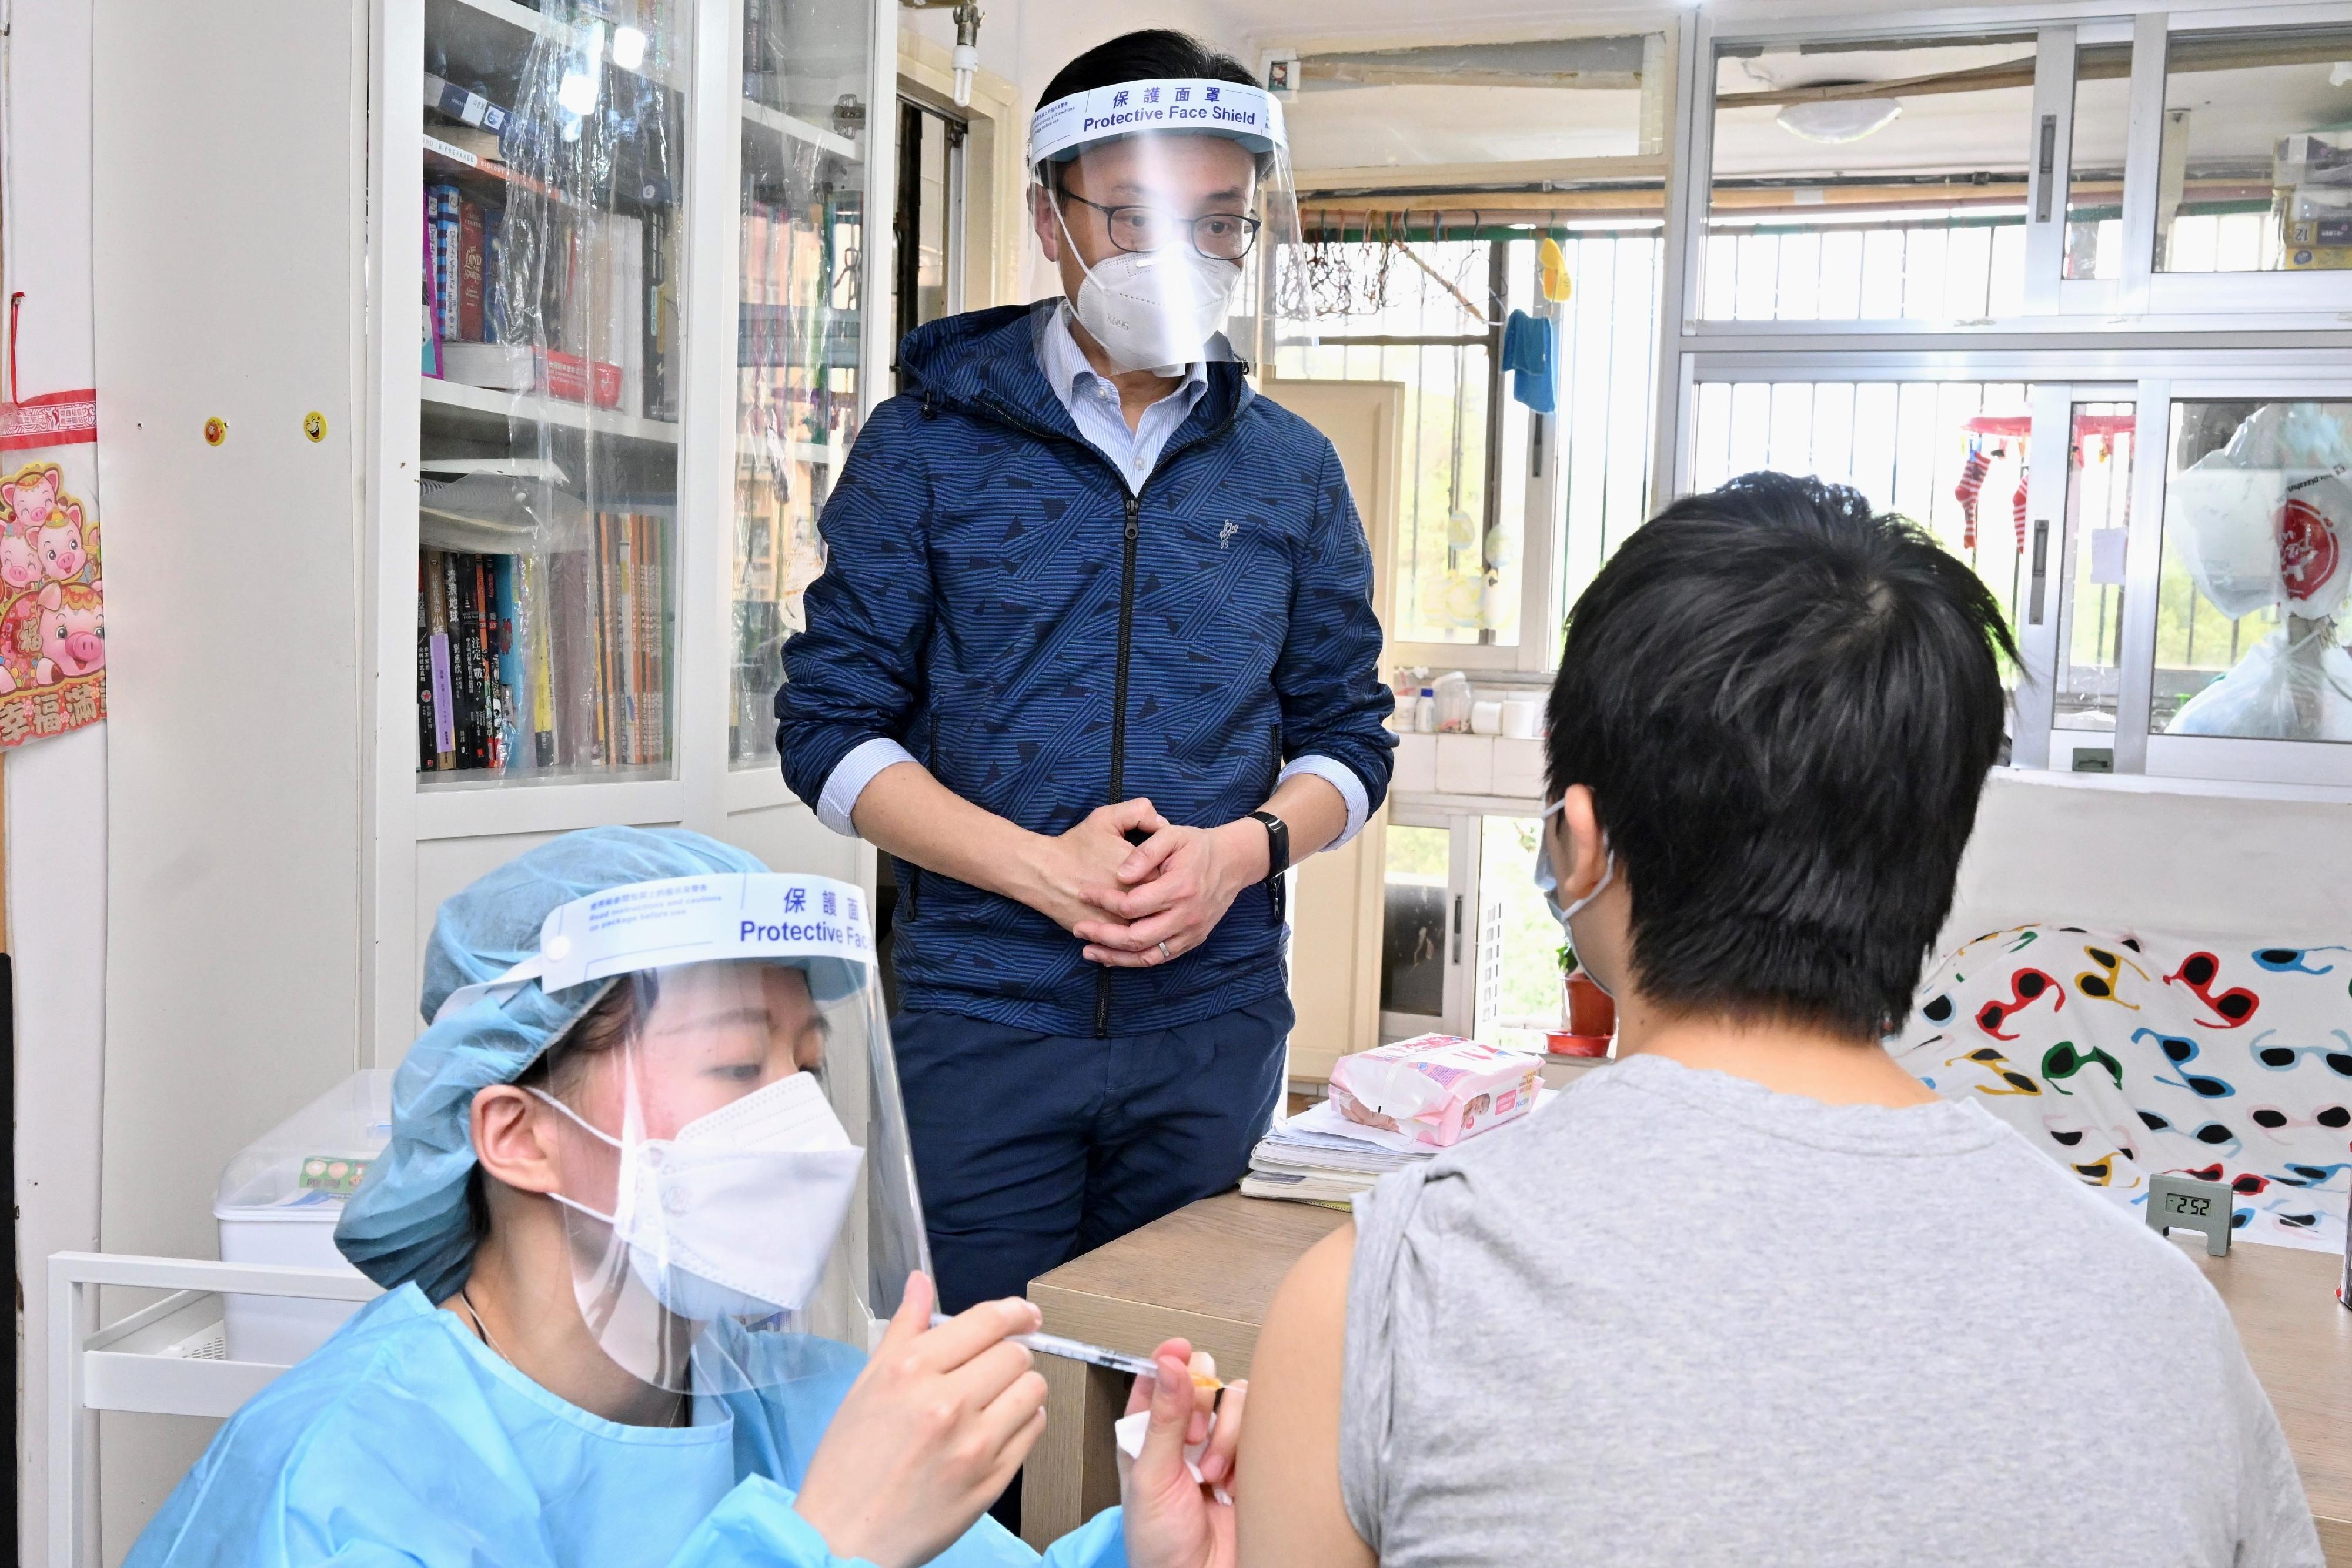 The Government has for the first time arranged a medical team to visit Sun Kit House, Sun Chui Estate in Sha Tin, to conduct a trial to provide door-to-door COVID-19 vaccination service to elderly persons aged 70 or above who have yet to get vaccinated and persons who are unable to leave their homes for vaccination due to illness or physical disability today (March 31). Photo shows the Secretary for the Civil Service, Mr Patrick Nip (centre), chatting with a resident who is getting vaccinated through the Home Vaccination Service.